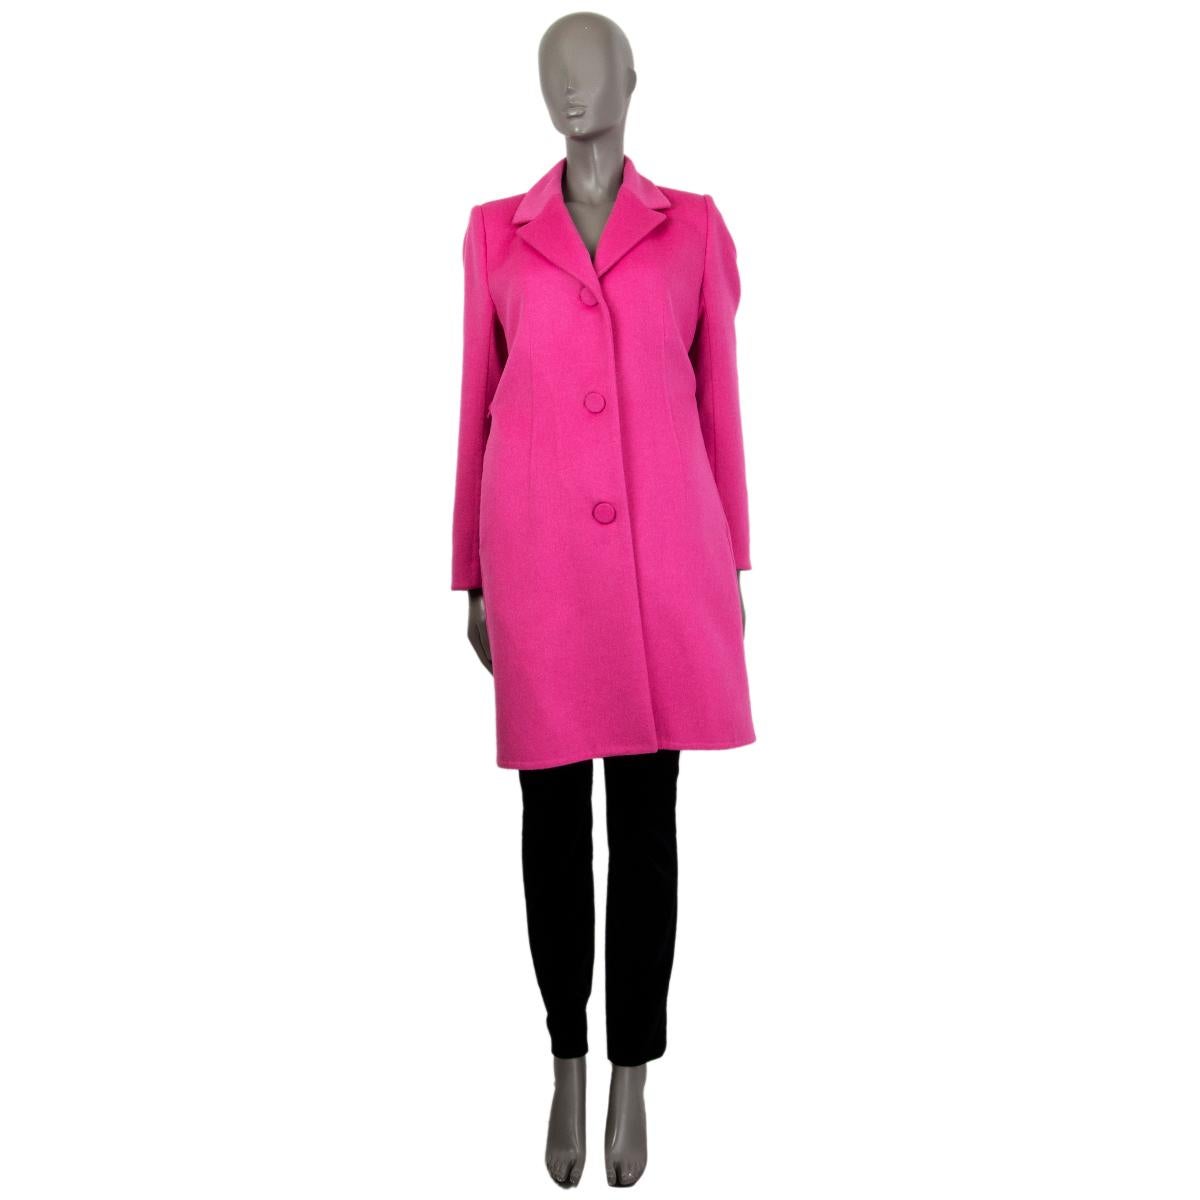 100% authentic Louis Vuitton belted single-breasted coat in pink wool (50%), angora (45%) and cashgora (5%) with a notch collar. Has two side slit pockets. Closes on the front with buttons. Lined in viscose (50%) and cupro (50%). Has been worn and